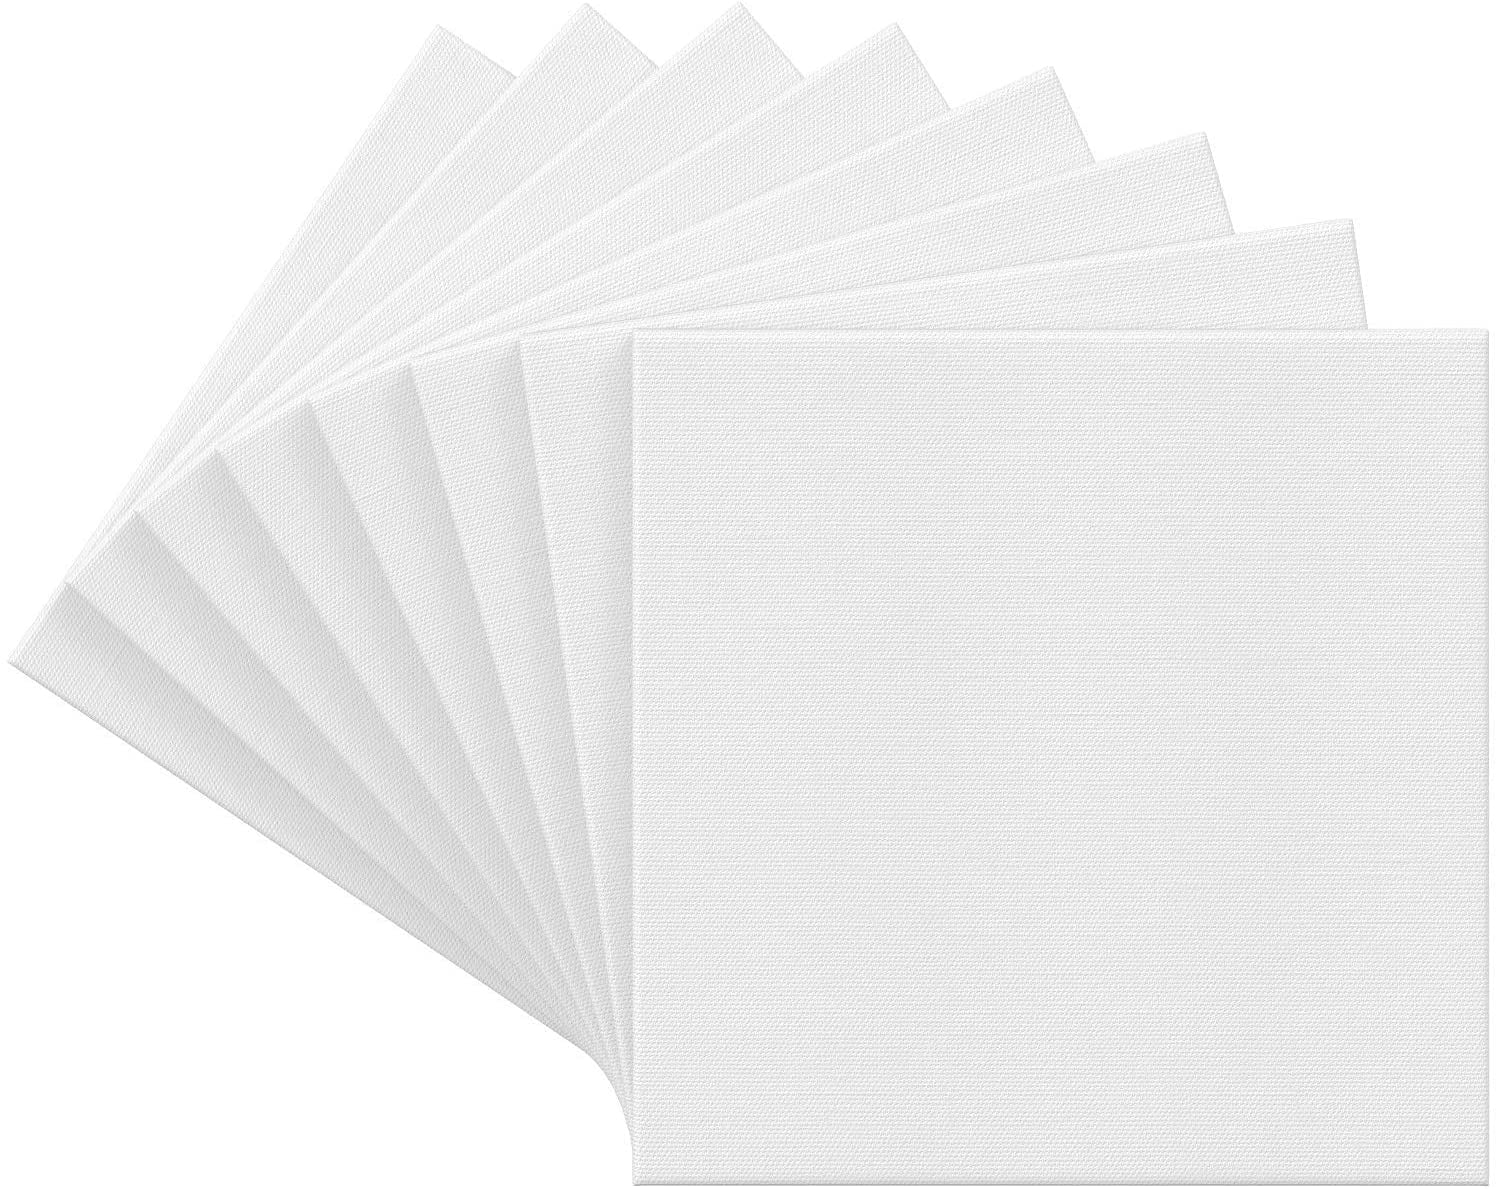 Arteza Paint Canvases for Painting, Pack of 12, 8 x 10 Inches, Blank White  Stretched Canvas Bulk, 100% Cotton, 8 oz Gesso-Primed, Art Supplies for  Adults and Teens, Acrylic Pouring and Oil